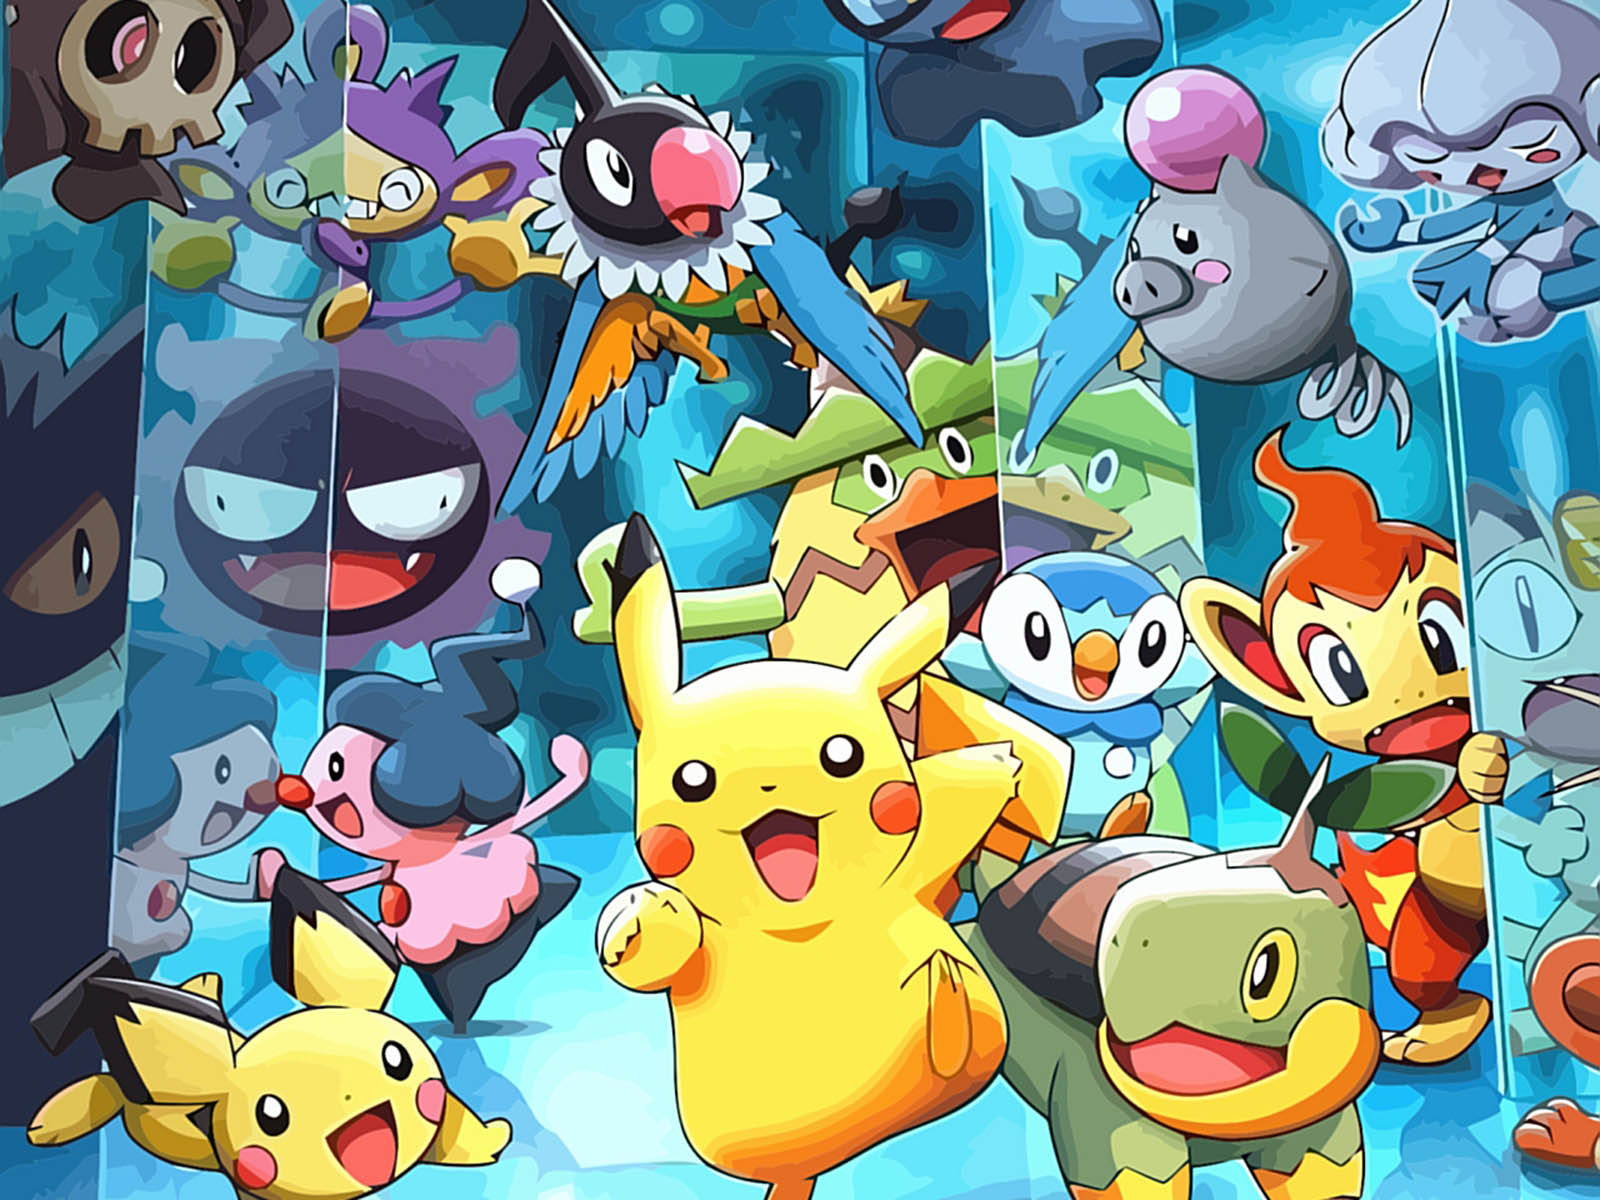 Download this You Are Watching The Pikachu Pokemon Wallpapers picture